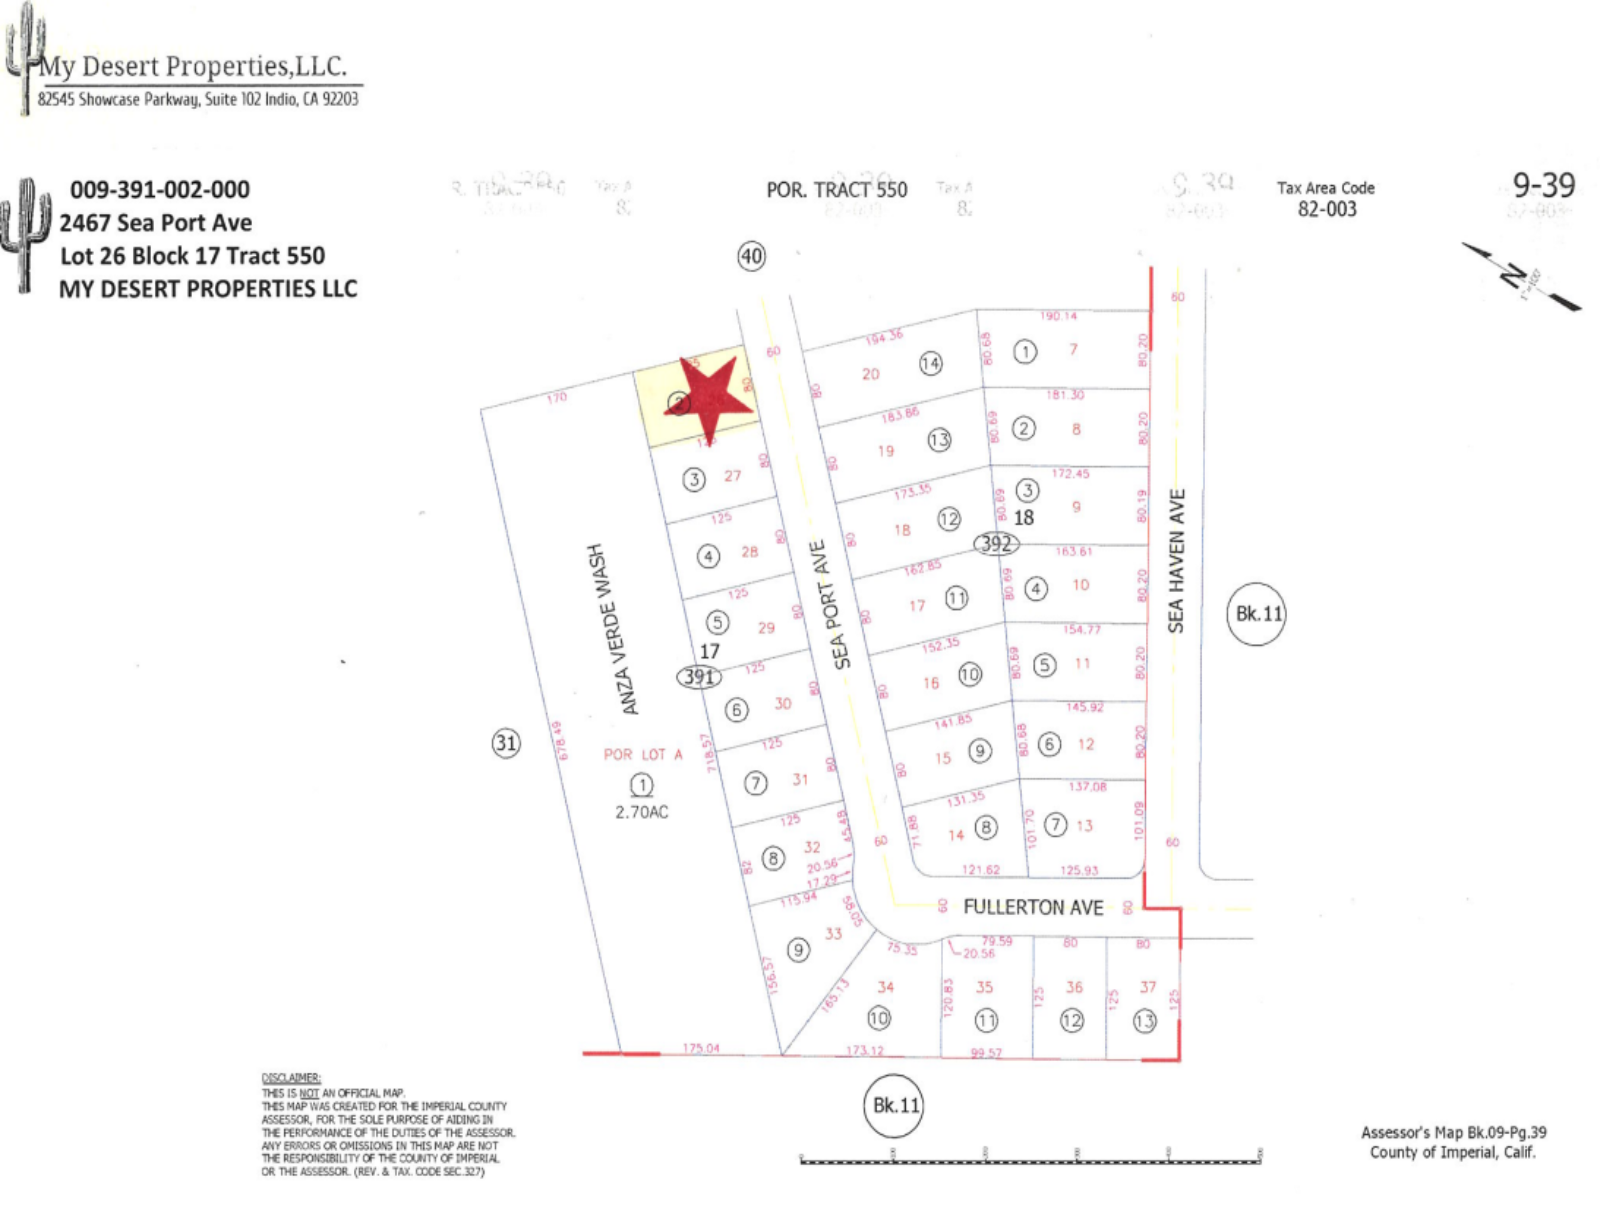 GREAT RESIDENTIAL LOT NEAR MAIN STREETS AND SCHOOLS!! LOW MONTHLY PAYMENTS OF $140.00  2467 Sea Port Ave., Salton City, CA 92275  APN: 009-391-002-000 - Get Land Today